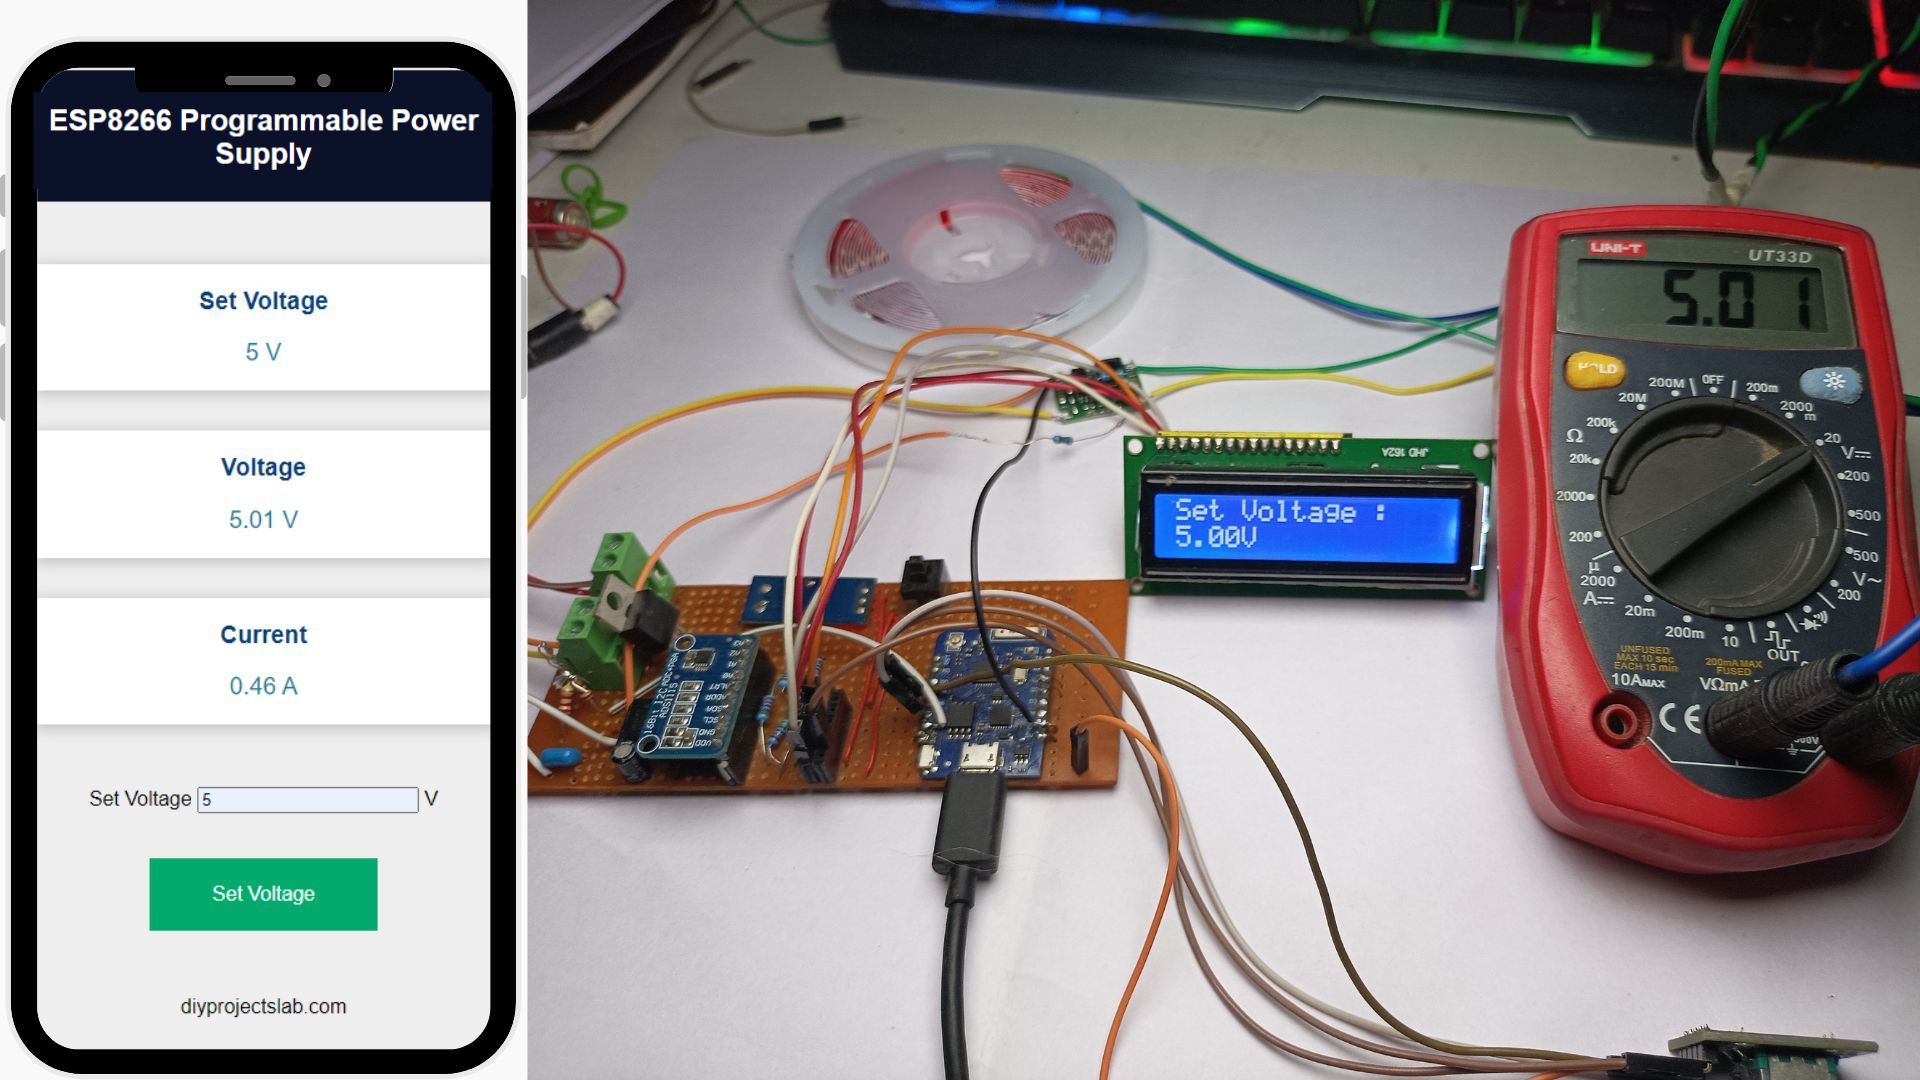 IoT Based Variable Programmable DC Power Supply ESP8266